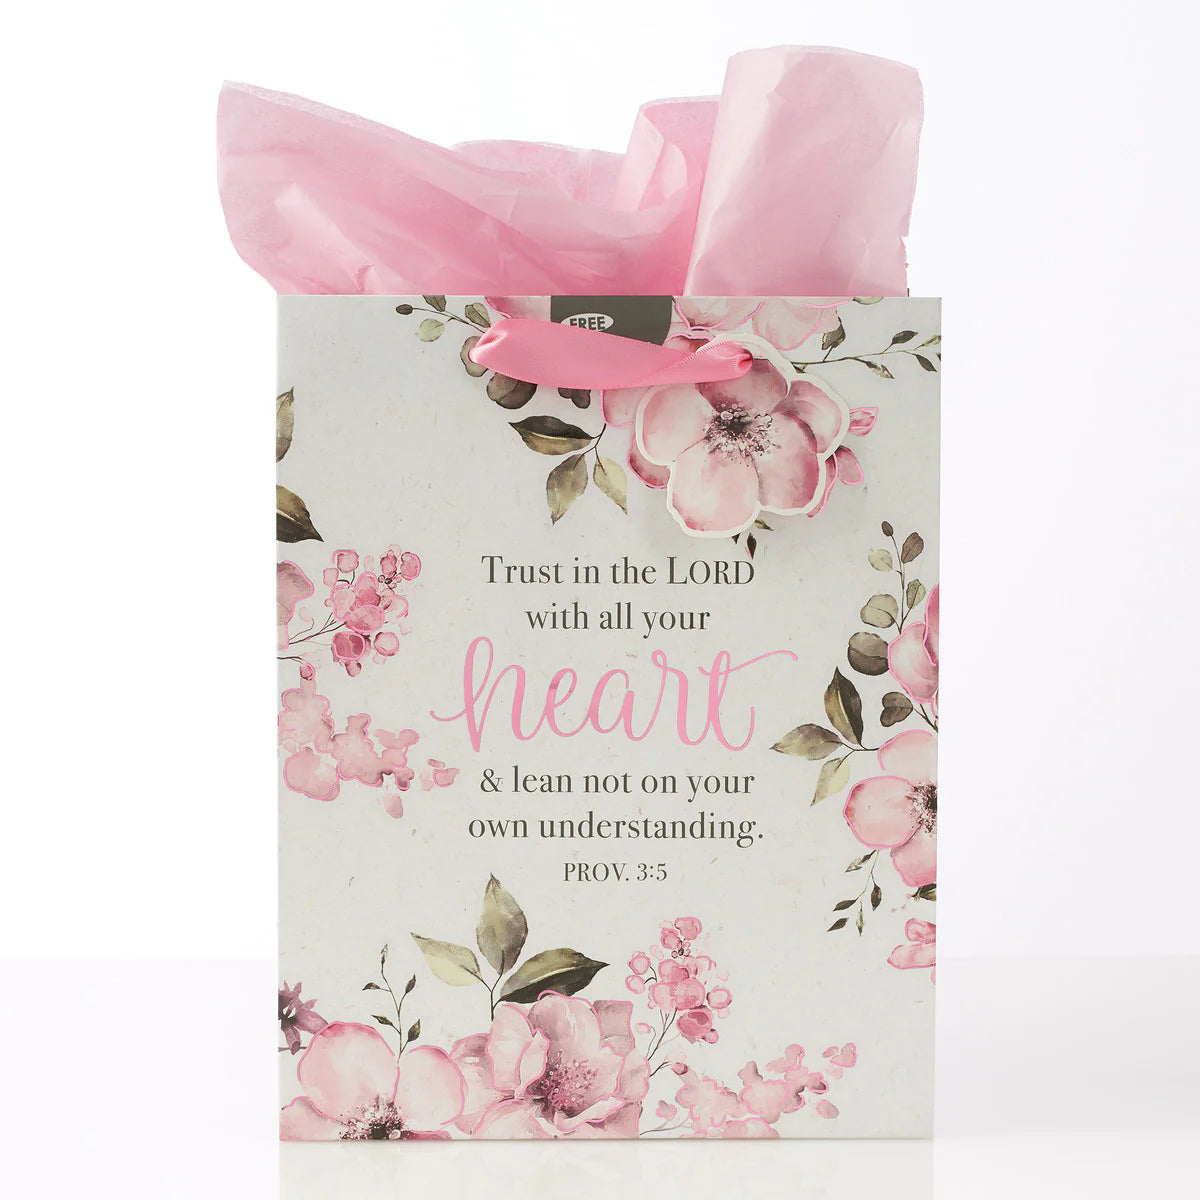 Trust in the Lord Proverbs 3:5 - Medium Gift Bag